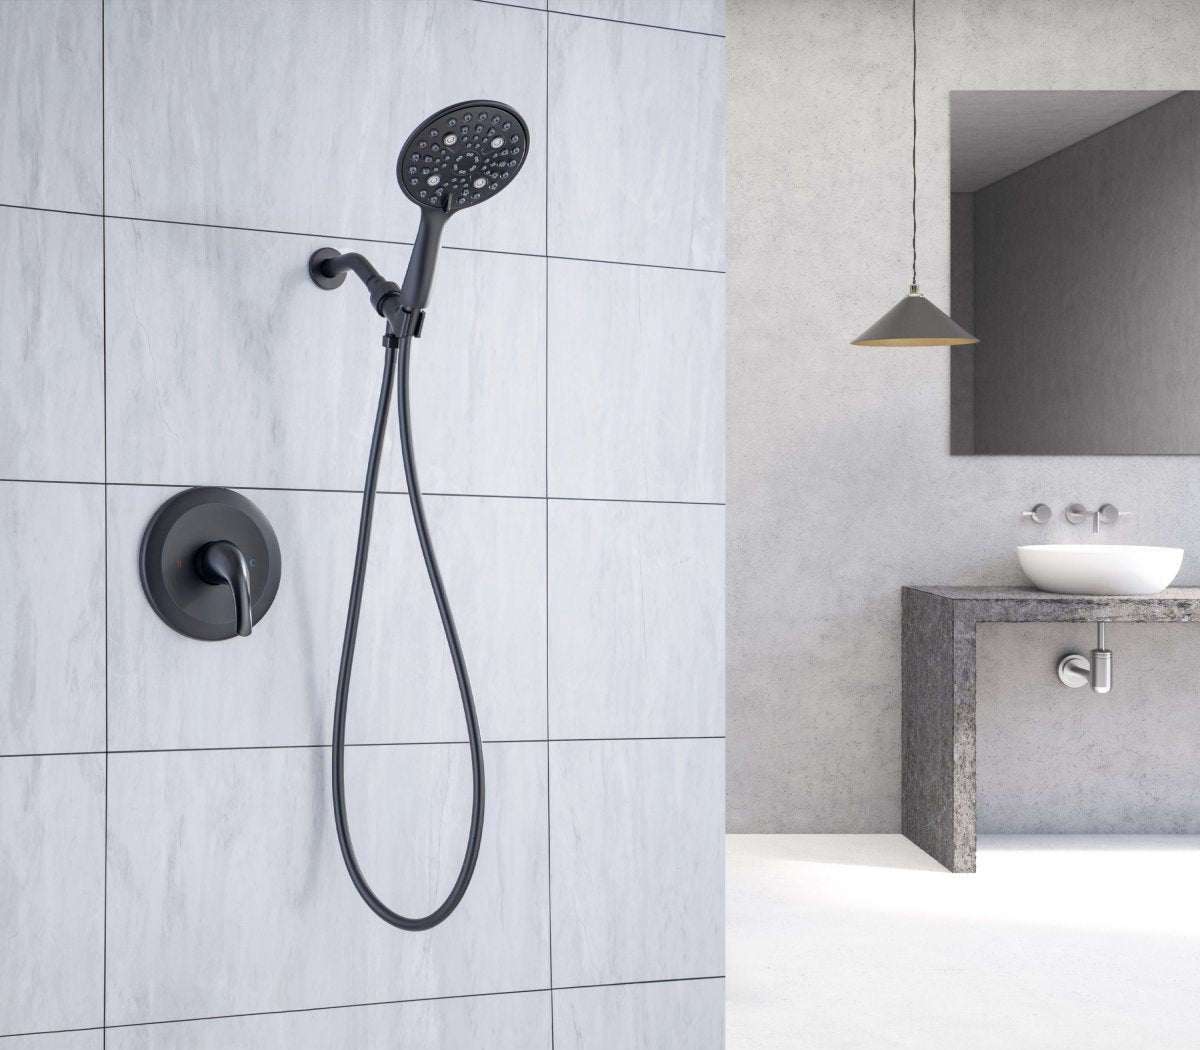 ExBrite 6 Inch Ceiling Mount Black Shower System Shower Combo Set Bathroom Wall Mount Mixer Shower Faucet Rough-In Valve and Shower Arm